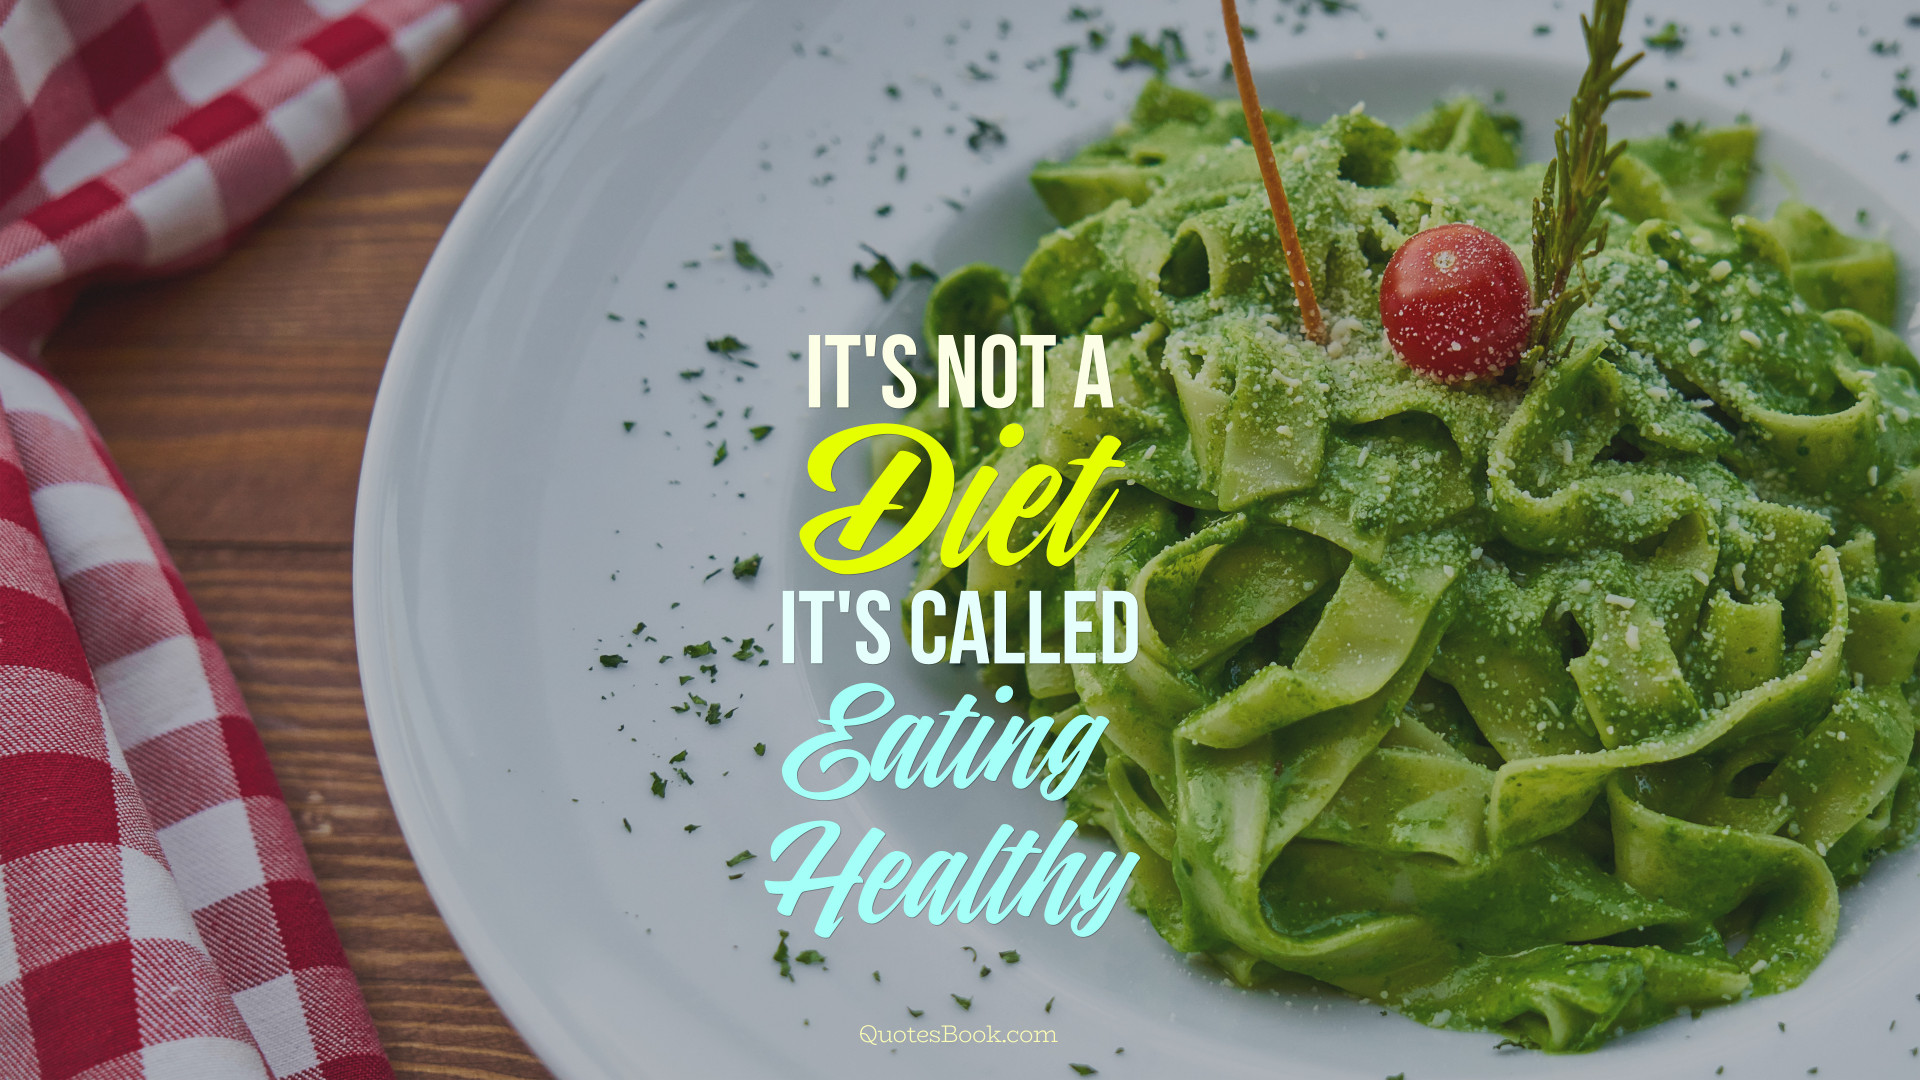 It's not a diet, it's called eating healthy - QuotesBook